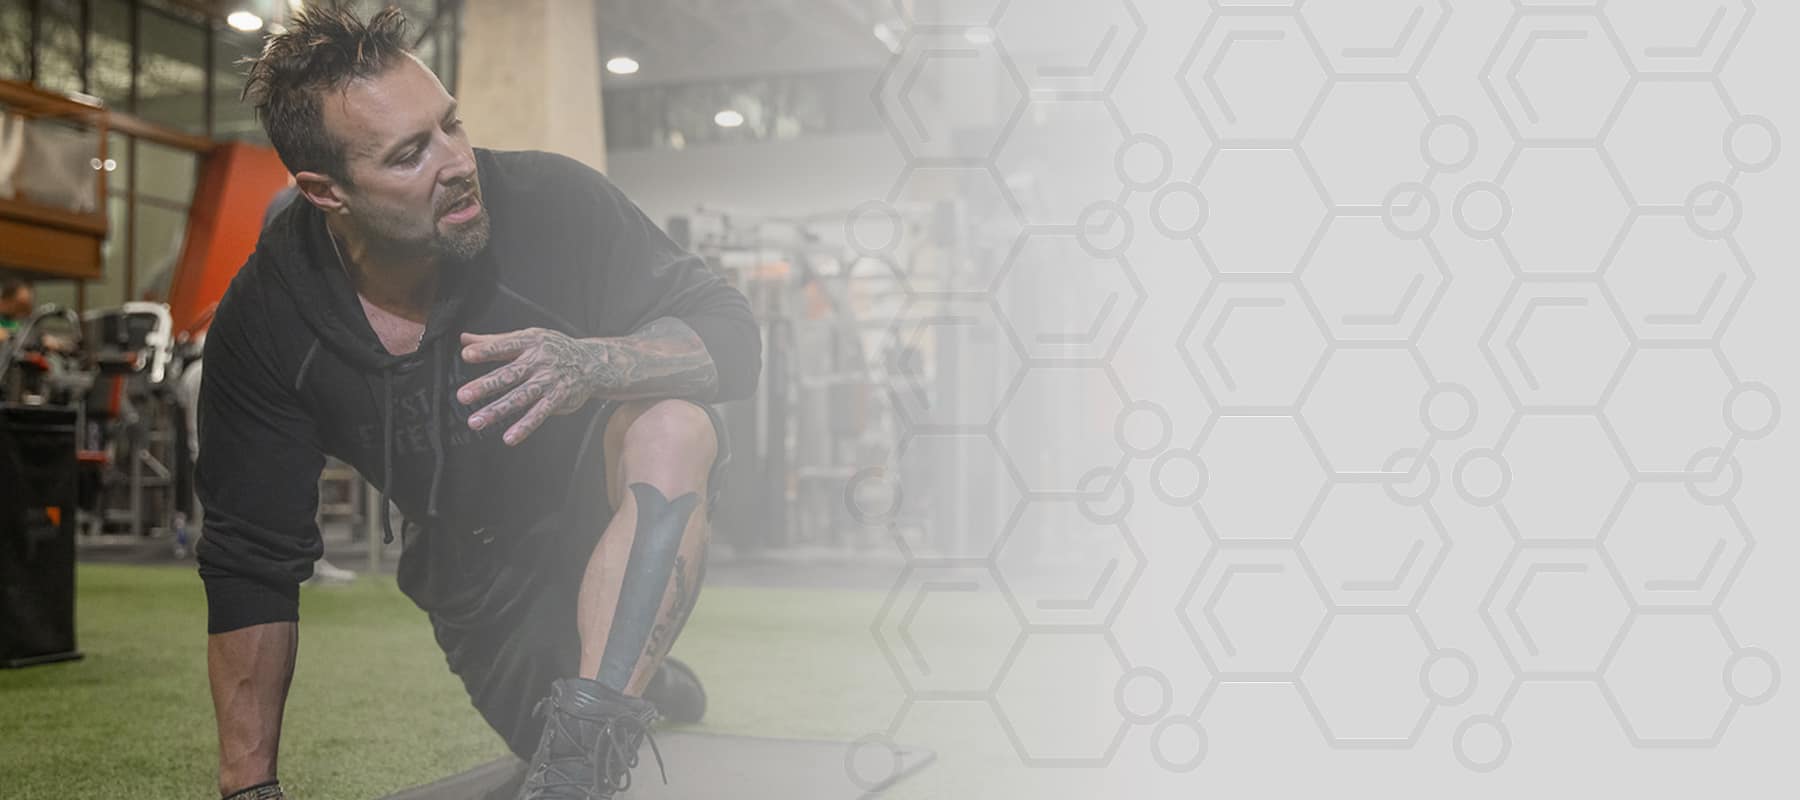 Kris Gethin recommended supplements